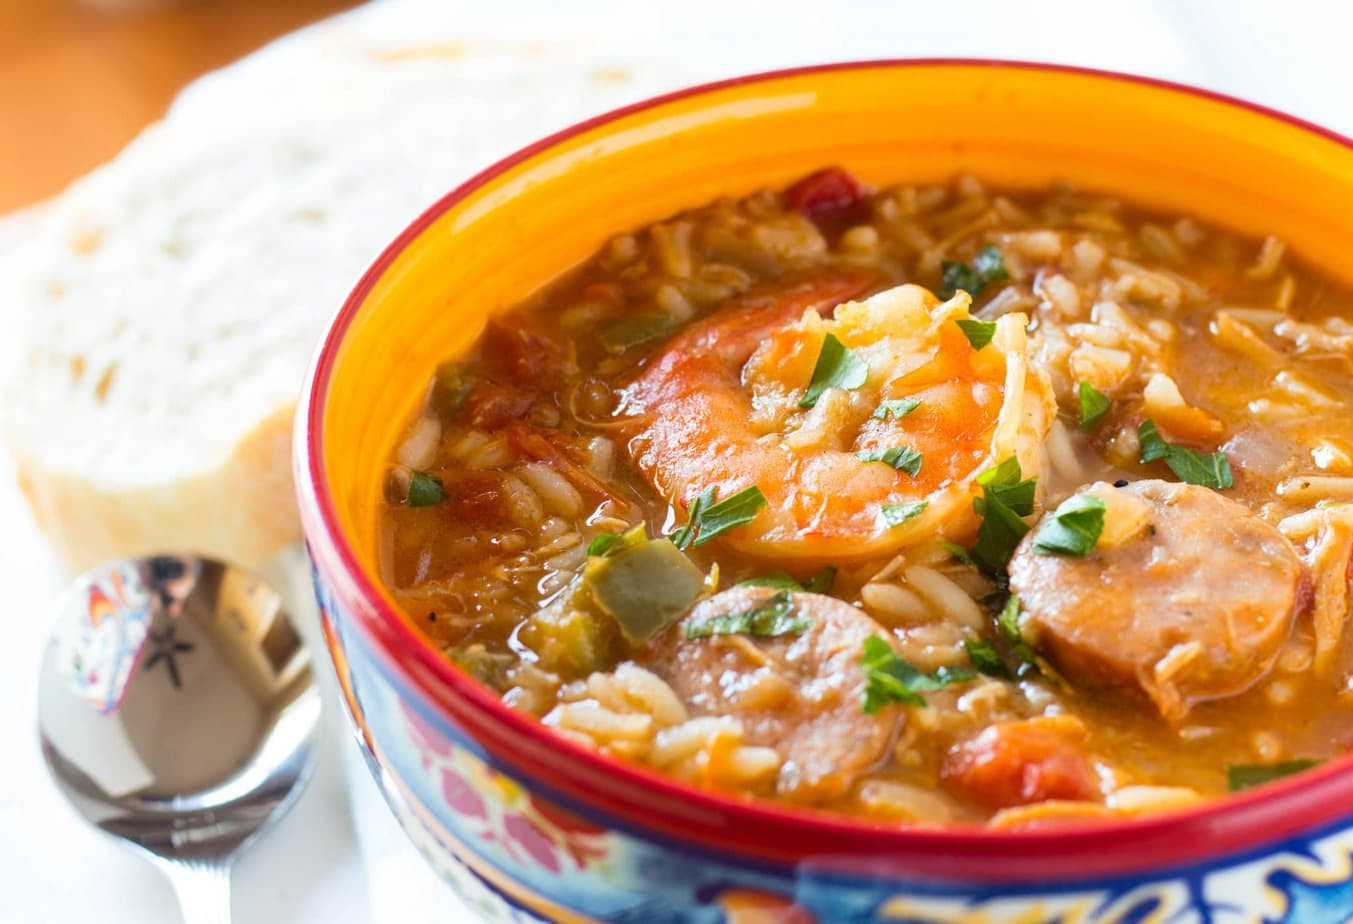 Gumbo Recipe Seafood Chicken And Sausage
 e Pot Creole Chicken Sausage and Shrimp Gumbo No